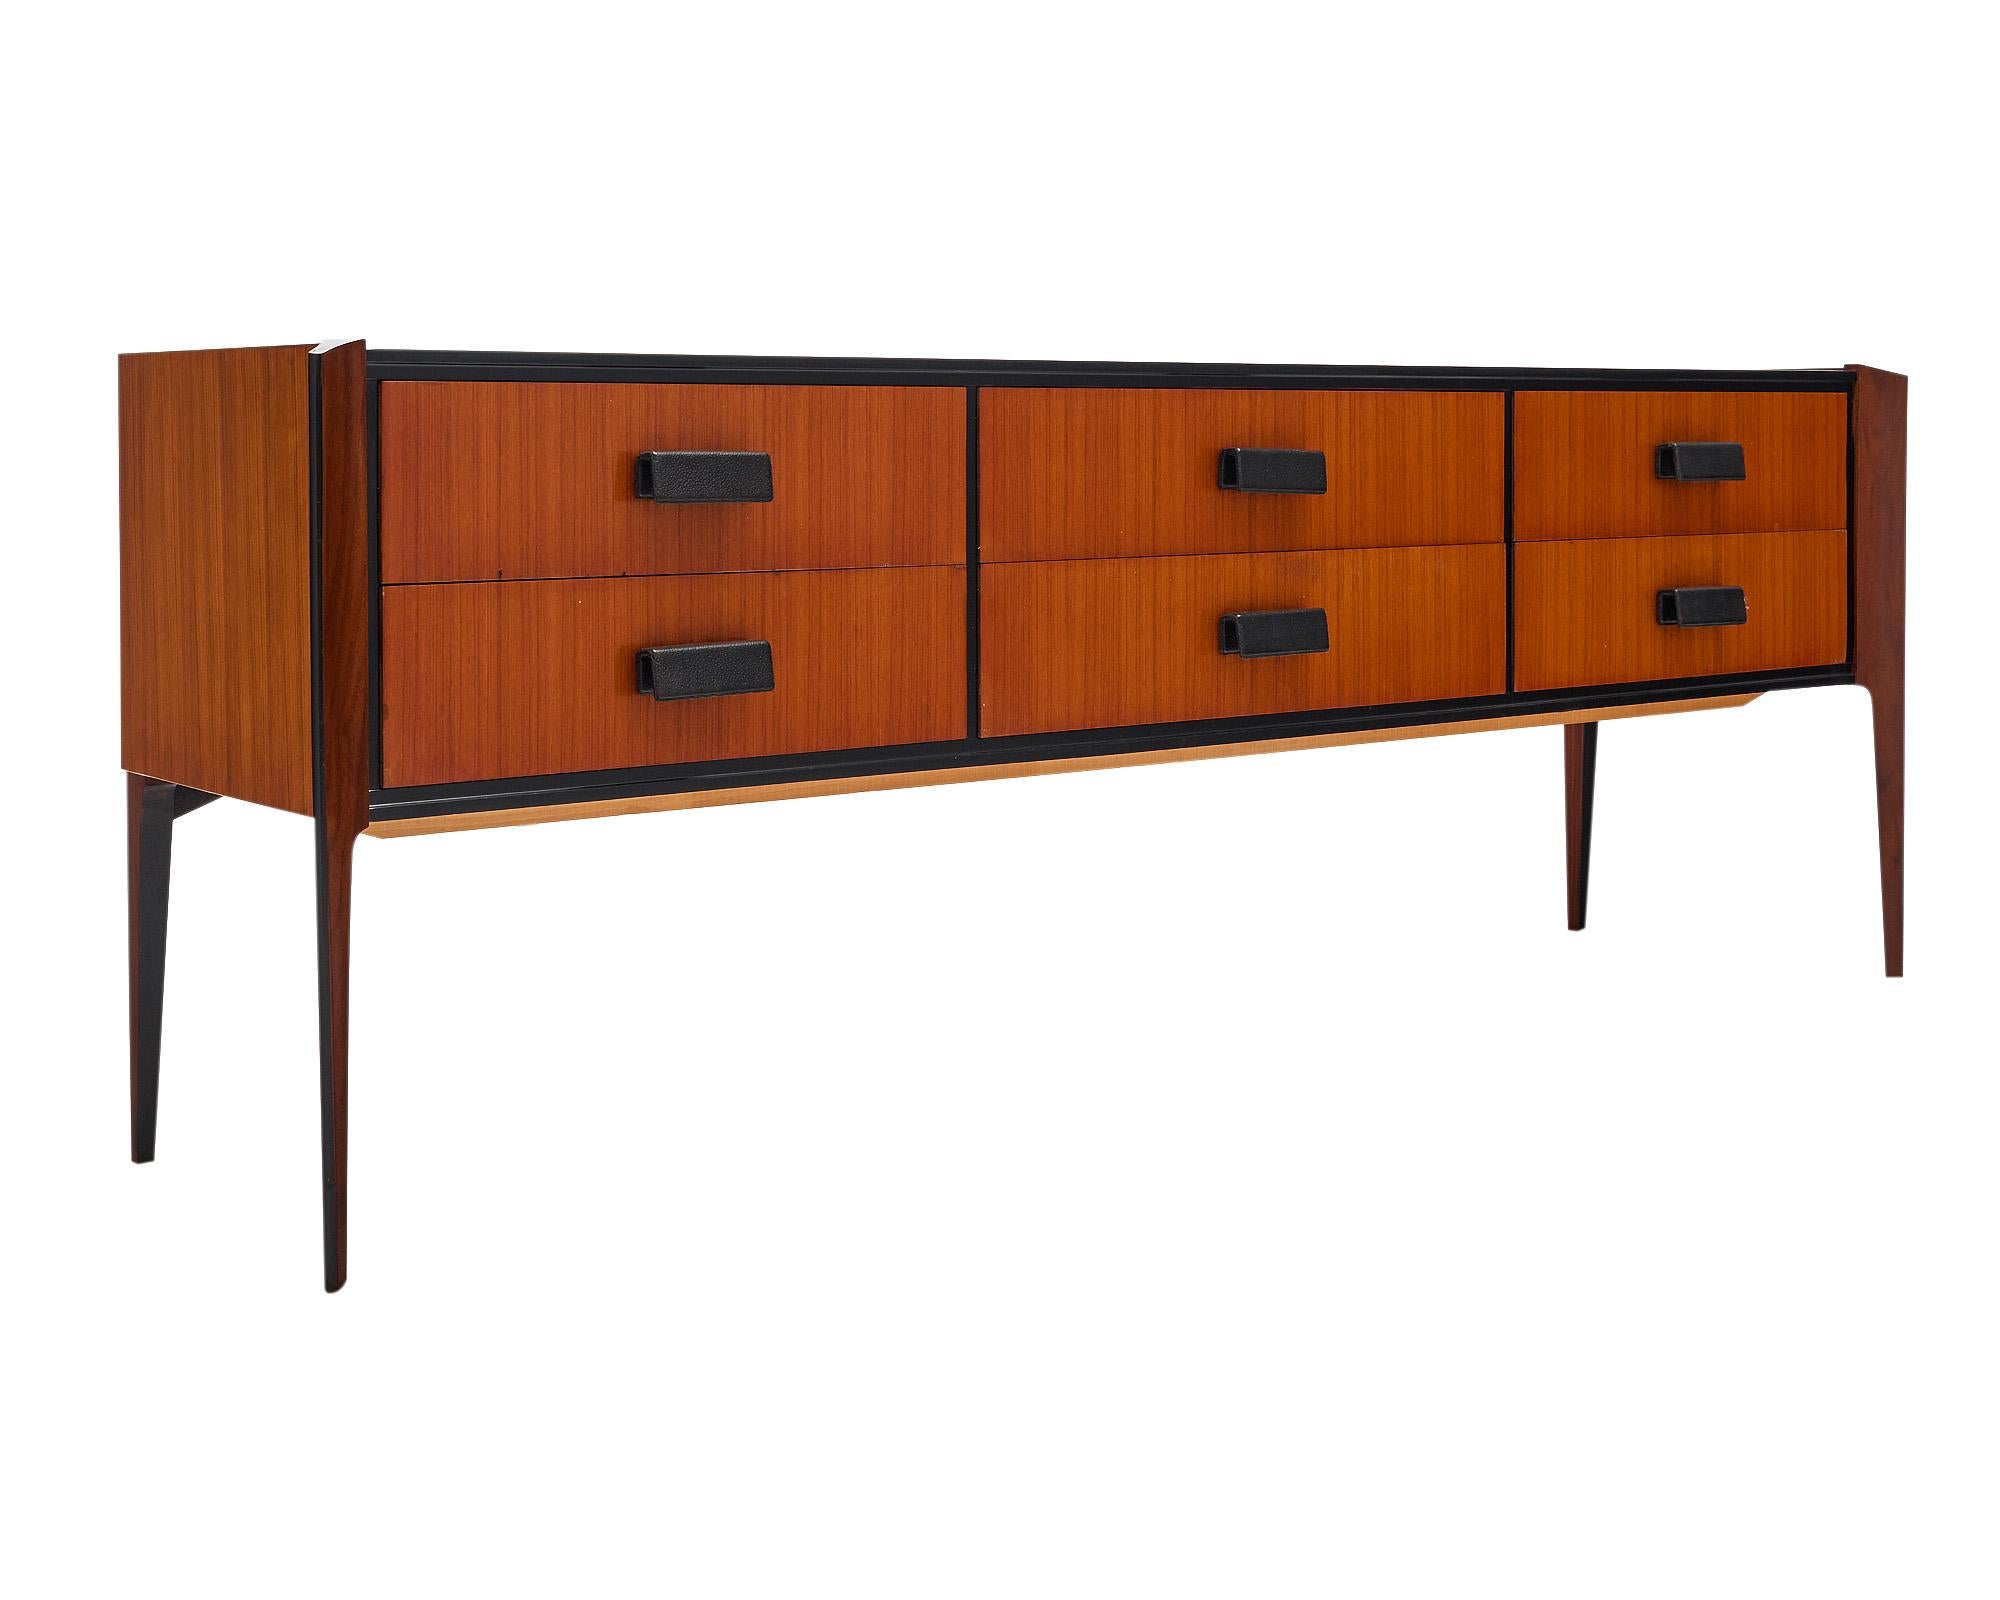 Chest or console case piece from Italy in the mid-century style. This chest features beautiful teak wood with unique tapered legs. There are six dovetailed drawers with leather wrapped pulls on each.